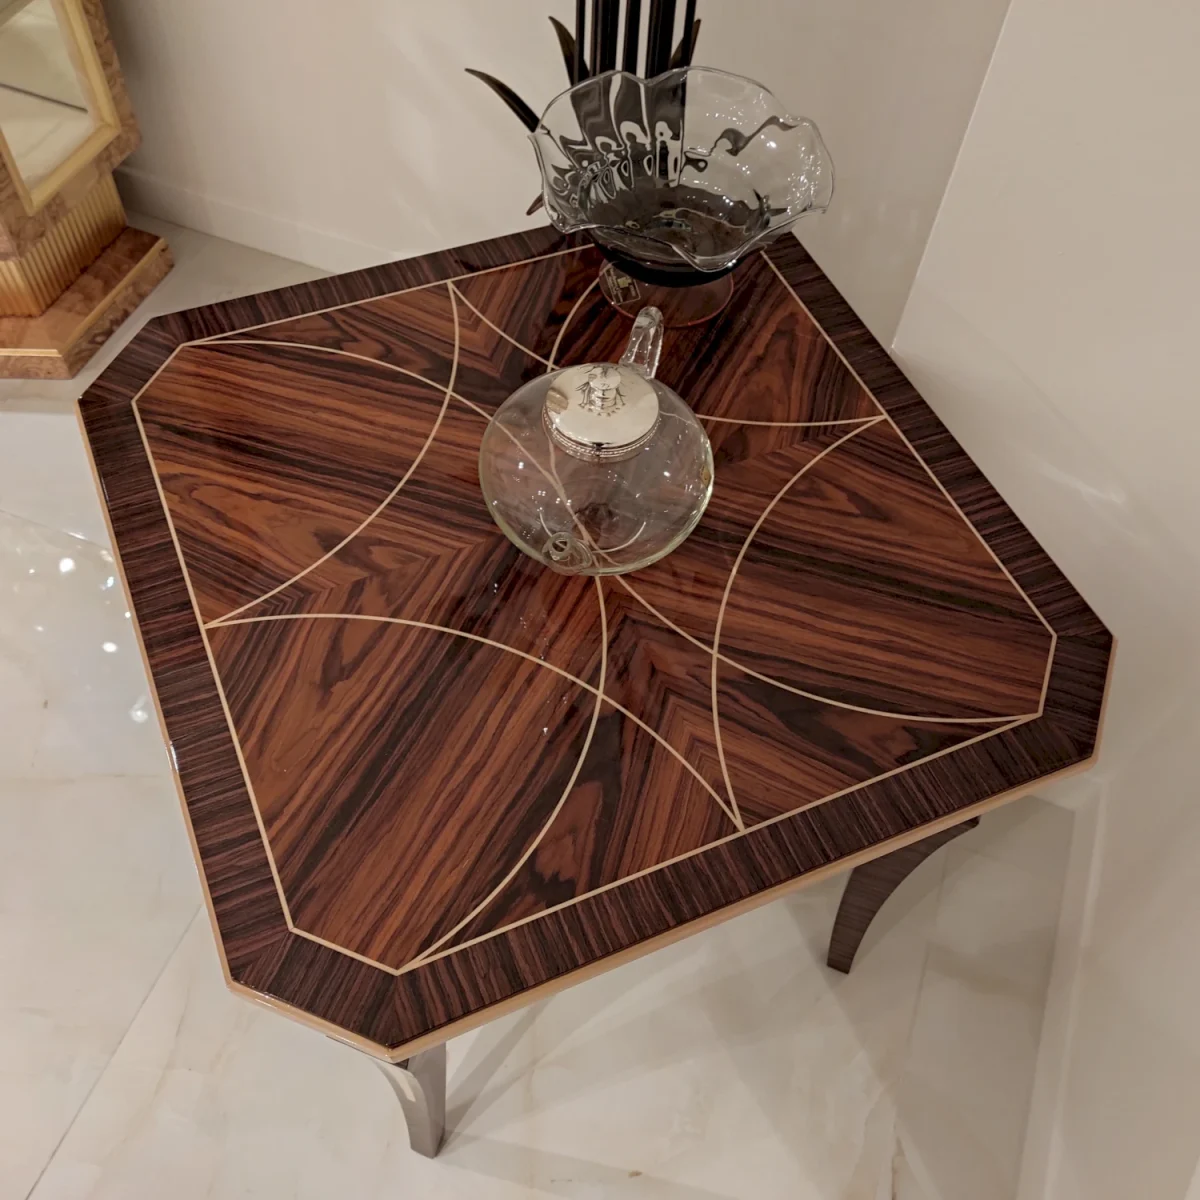 Monte Carlo LUX squared side coffee table